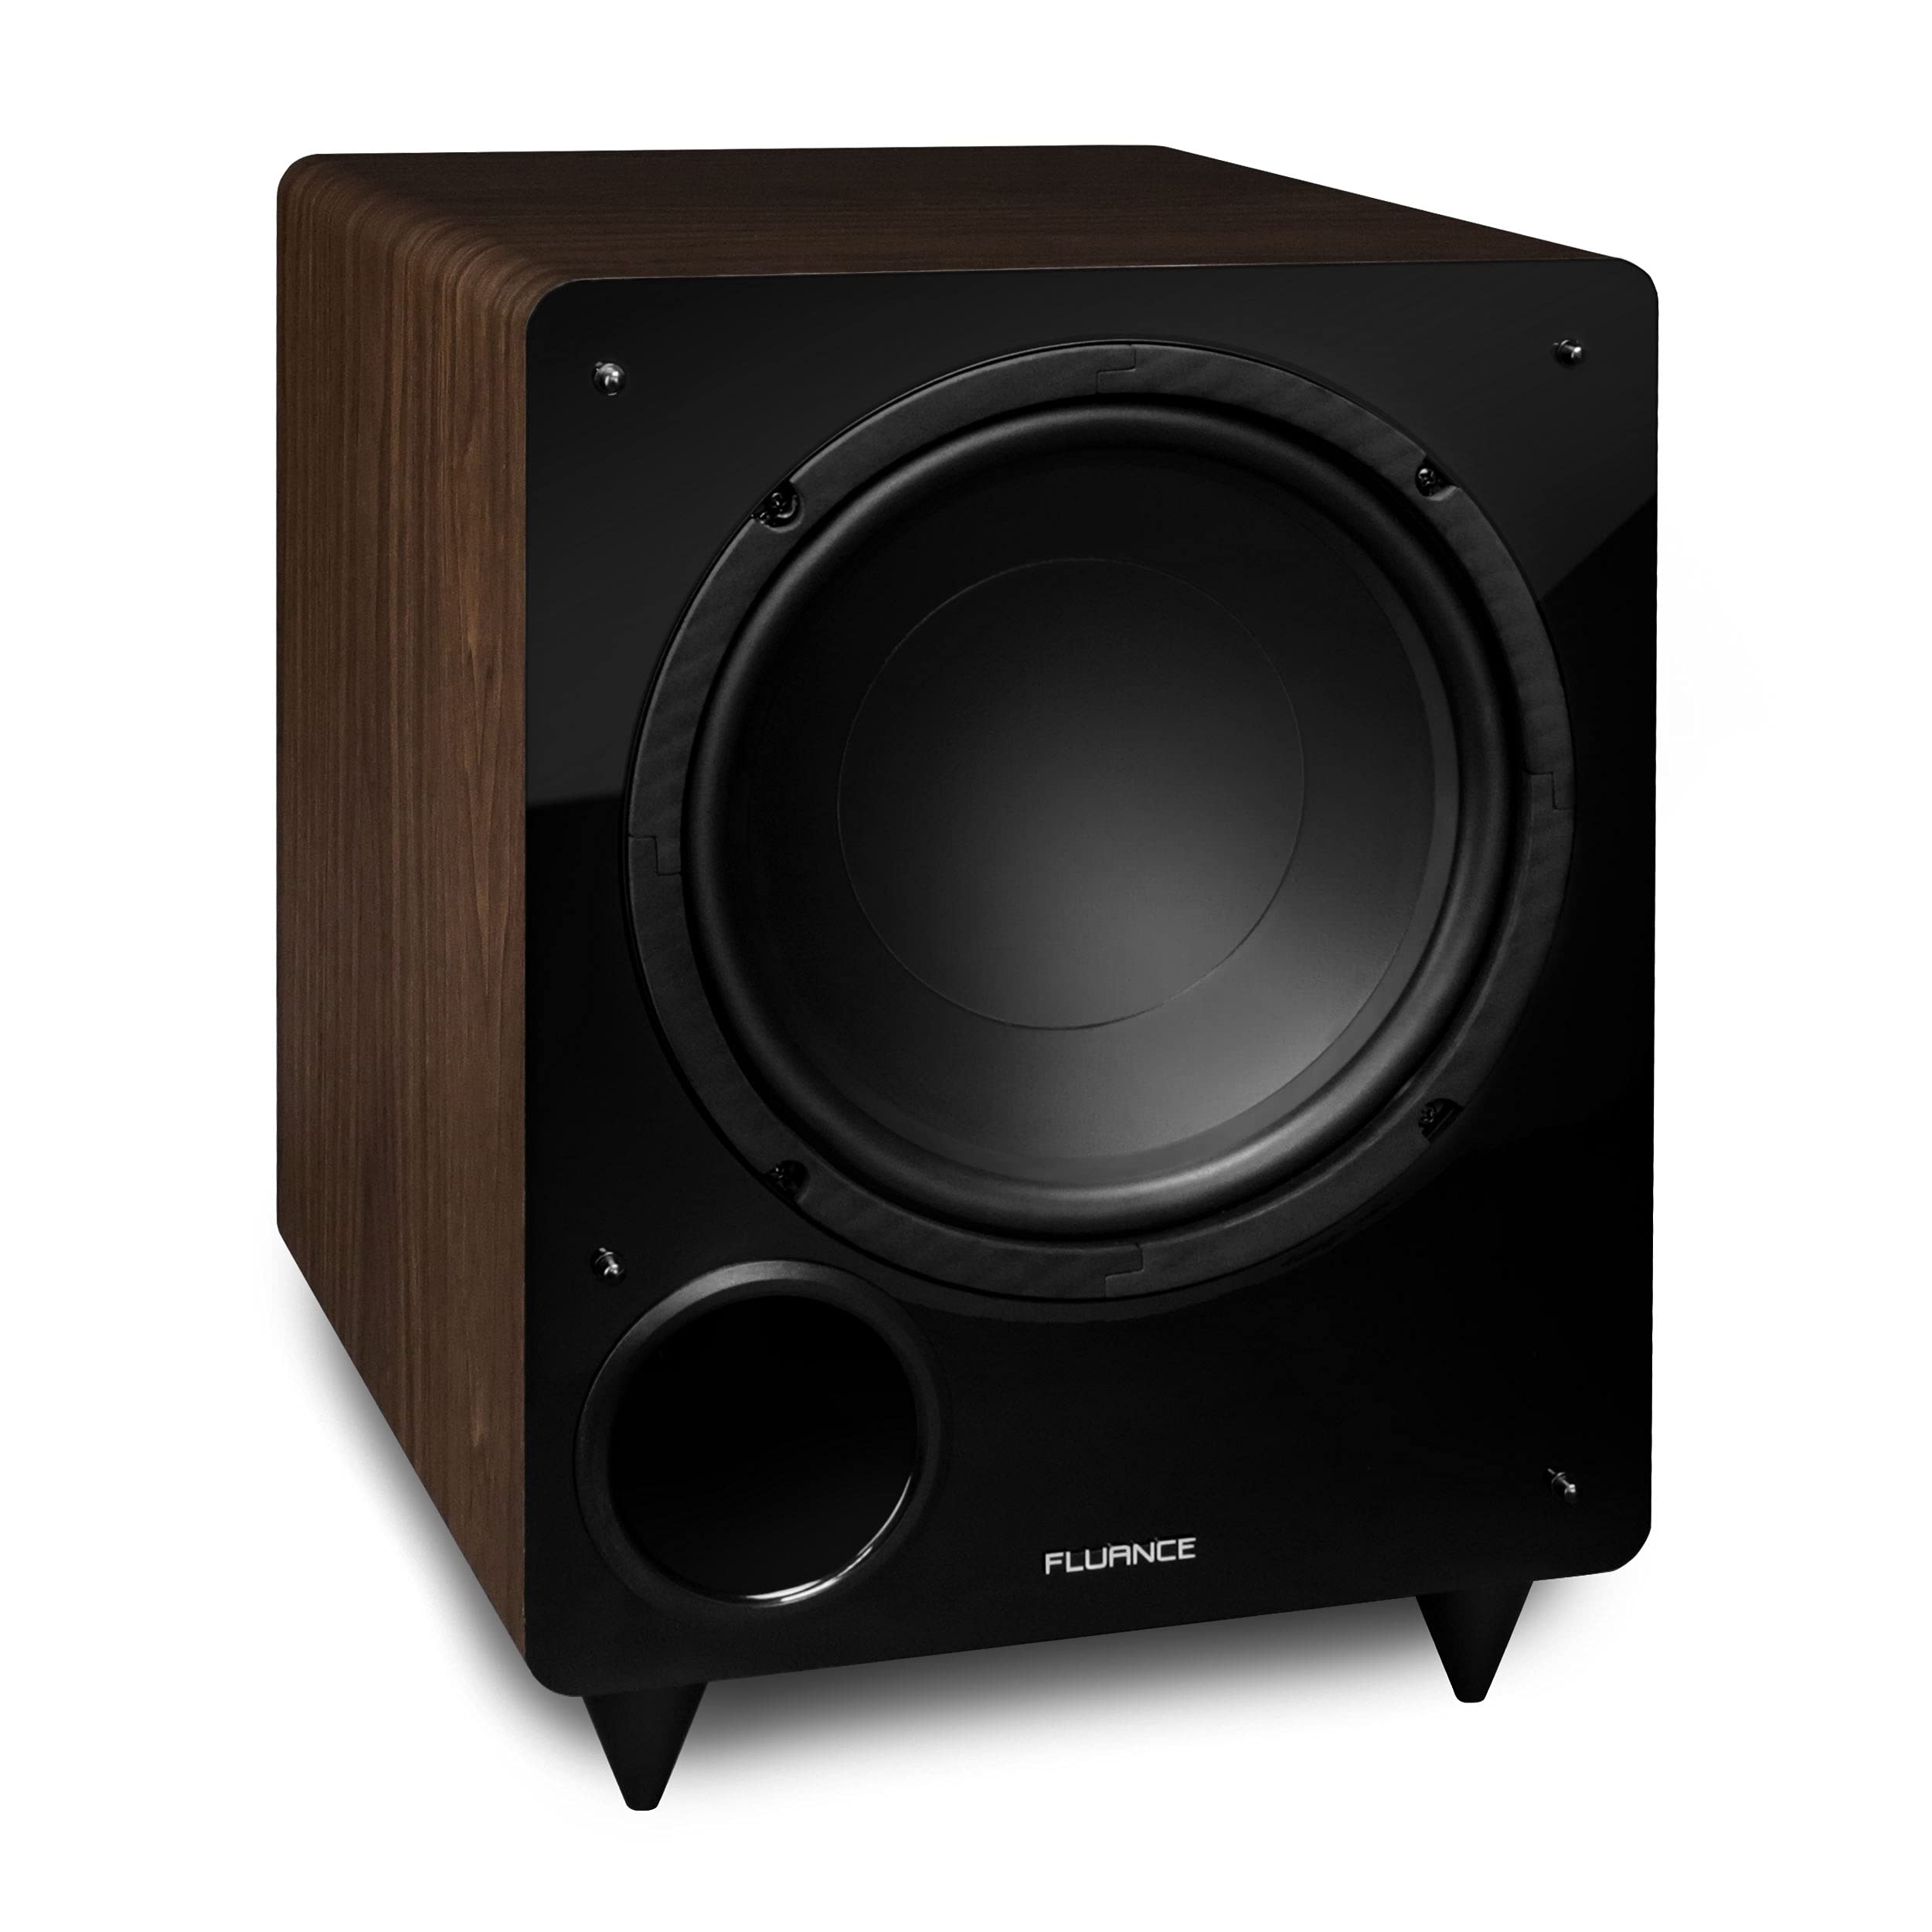 Fluance Signature HiFi Surround Sound Home Theater 5.1 Channel Speaker System Including 3-Way Floorstanding Towers, Center Channel, Bipolar Speakers and DB10 Subwoofer - Natural Walnut (HF51WB)